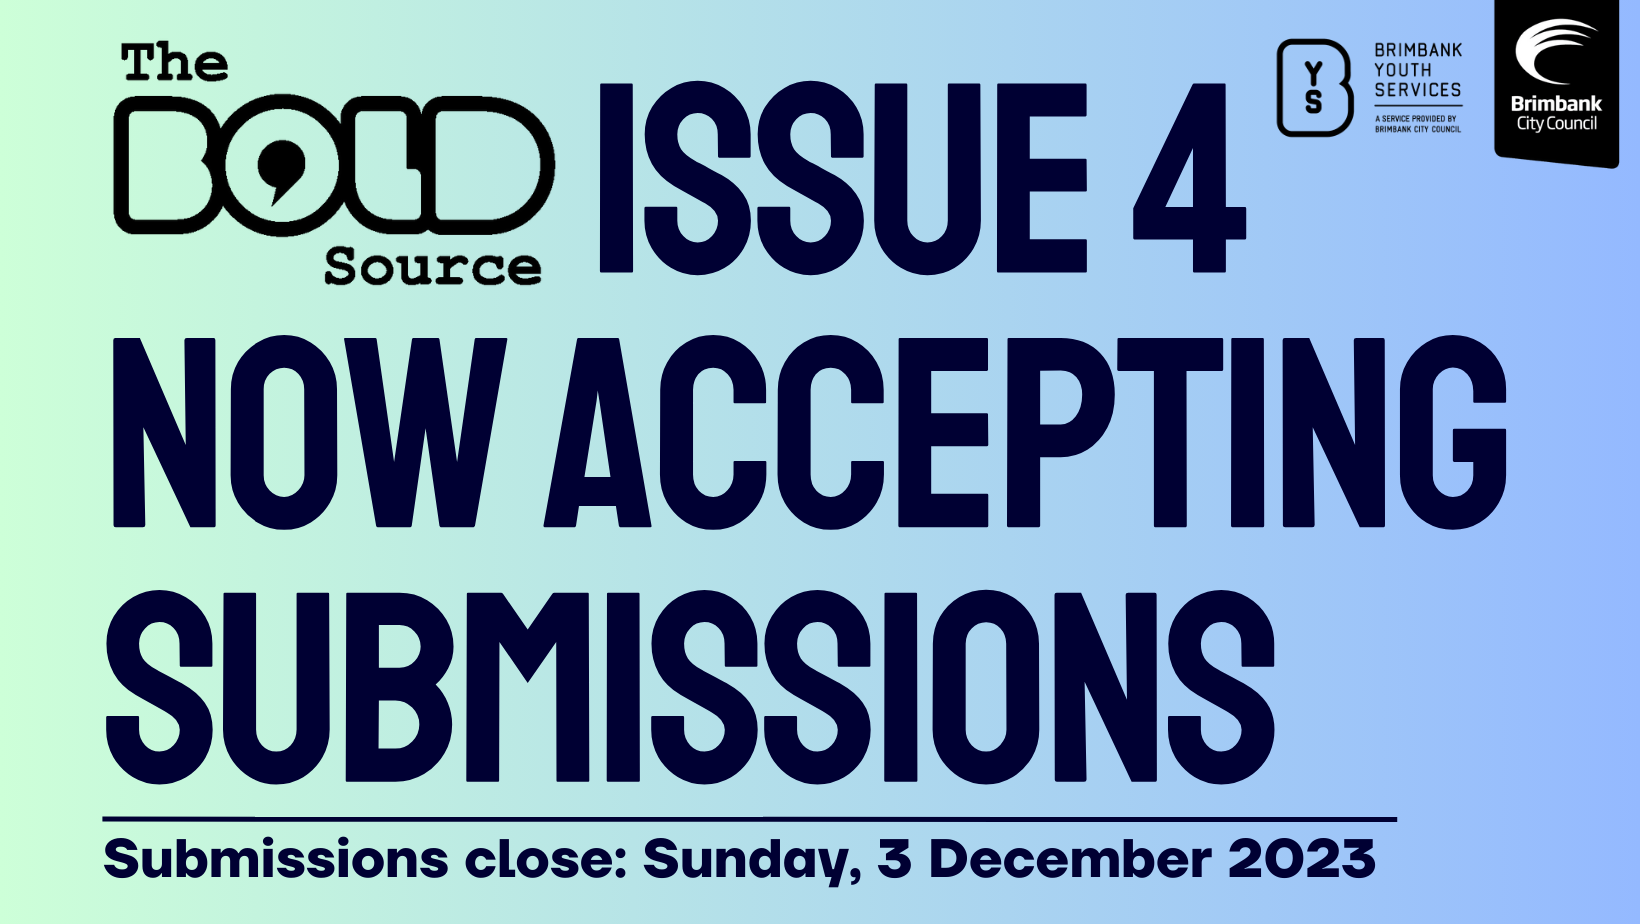 SUBMISSION CALL OUT for The Bold Source Issue 4 — Brimbank Youth Services